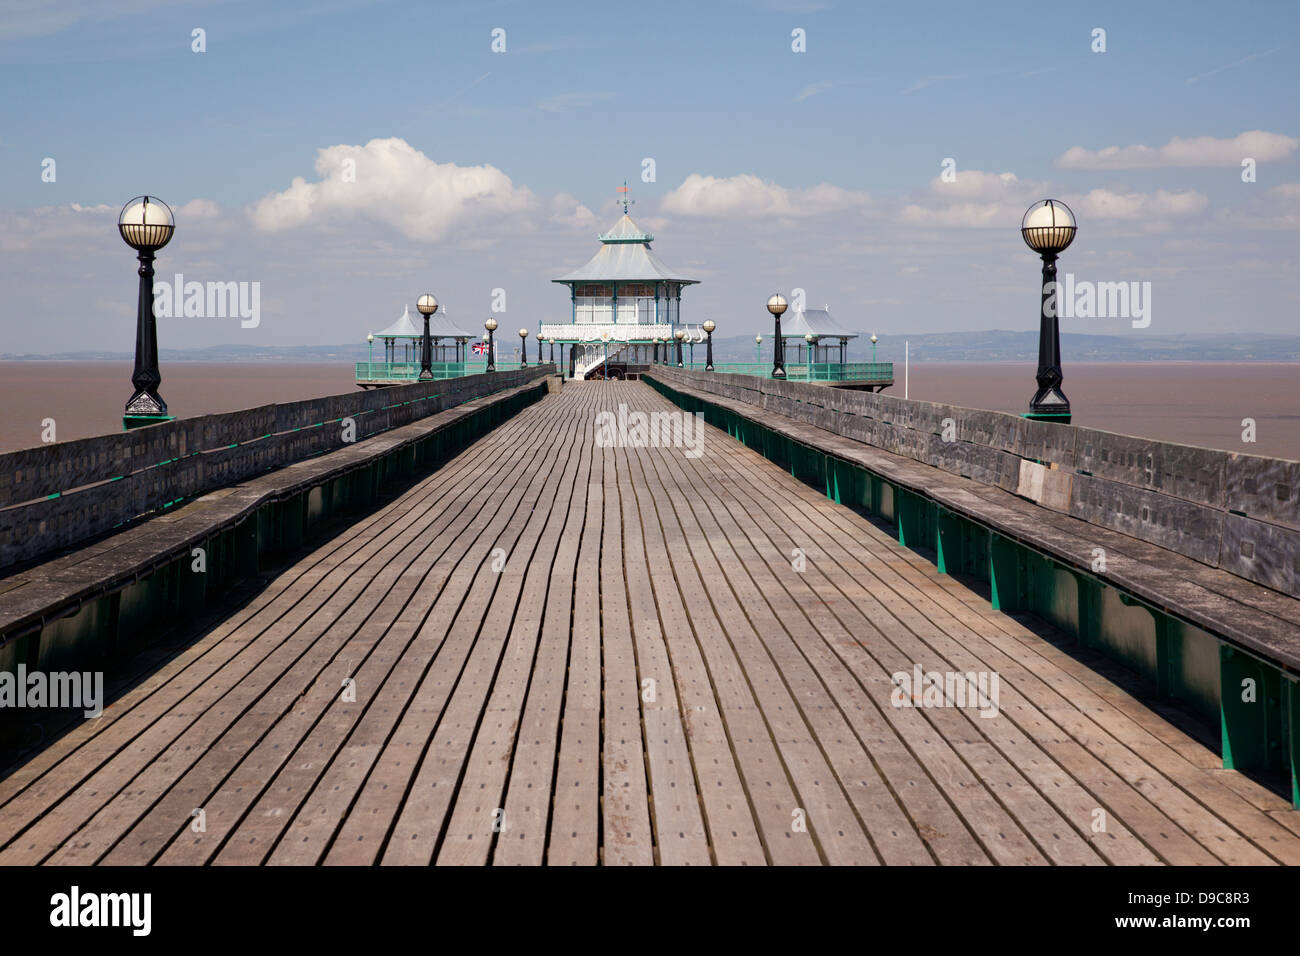 Clevedon Pier - A restored Victorian Pier which is a Grade I listed building in Somerset, England Stock Photo